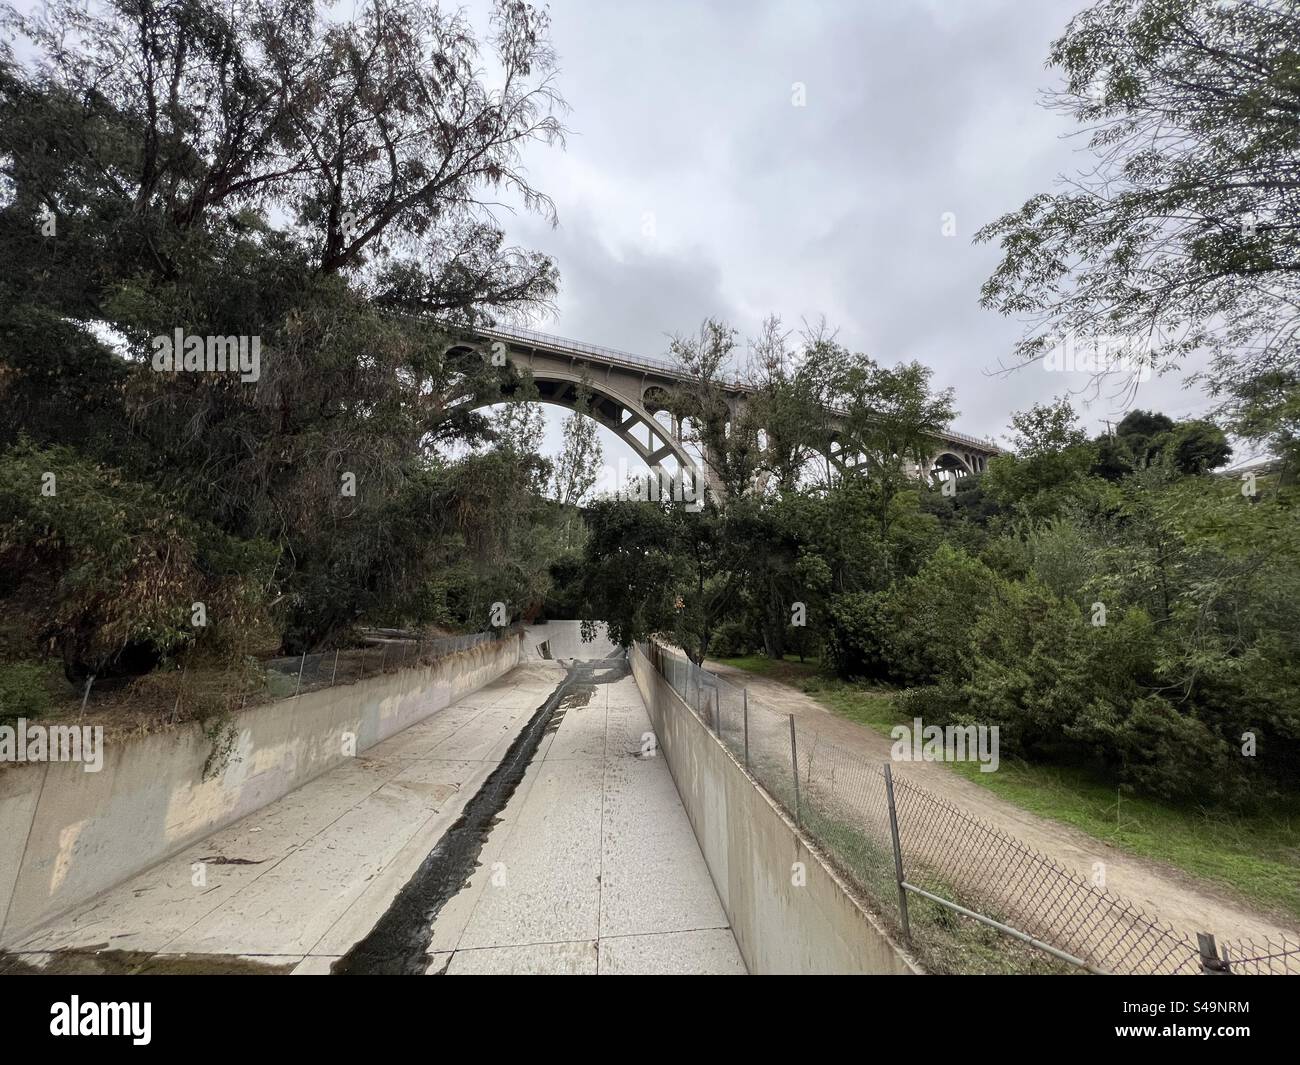 Wide view, Colorado Street Bridge over the Arroyo Seco river, Pasadena, in southern California, on an overcast day Stock Photo